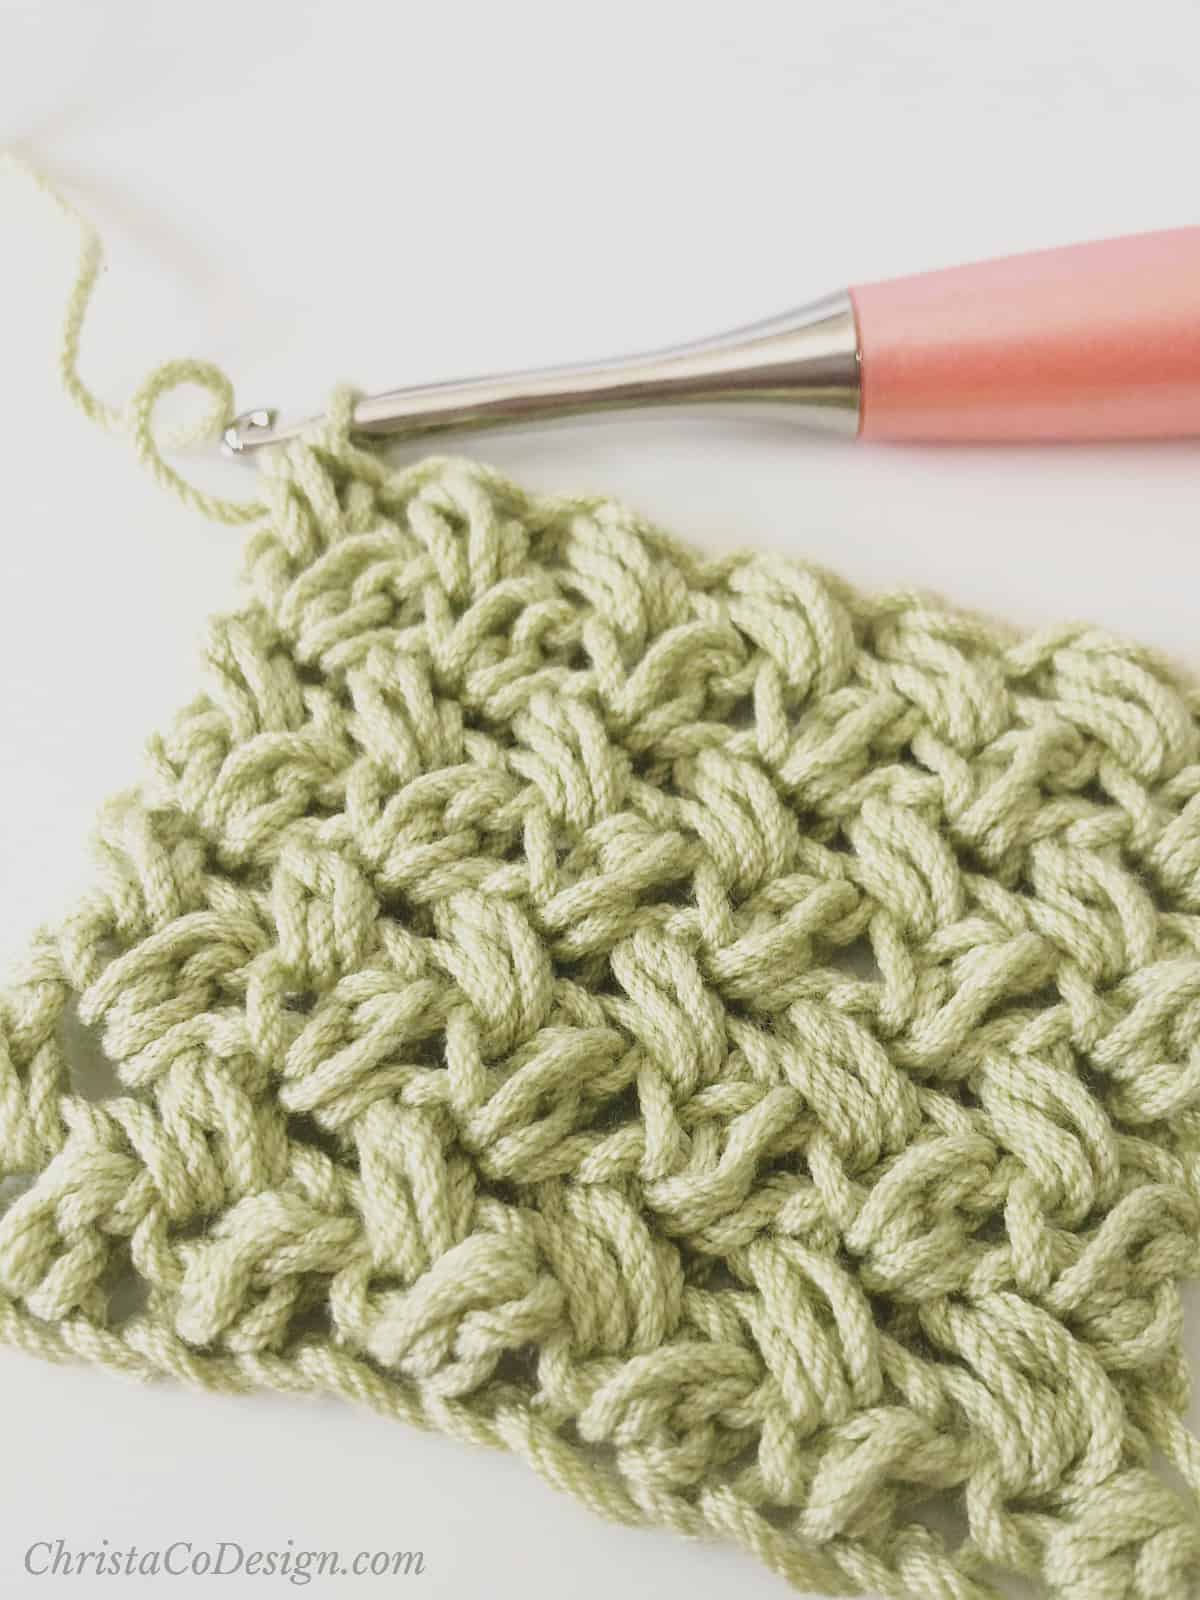 How to Crochet the Mini Bean Stitch Step by Step